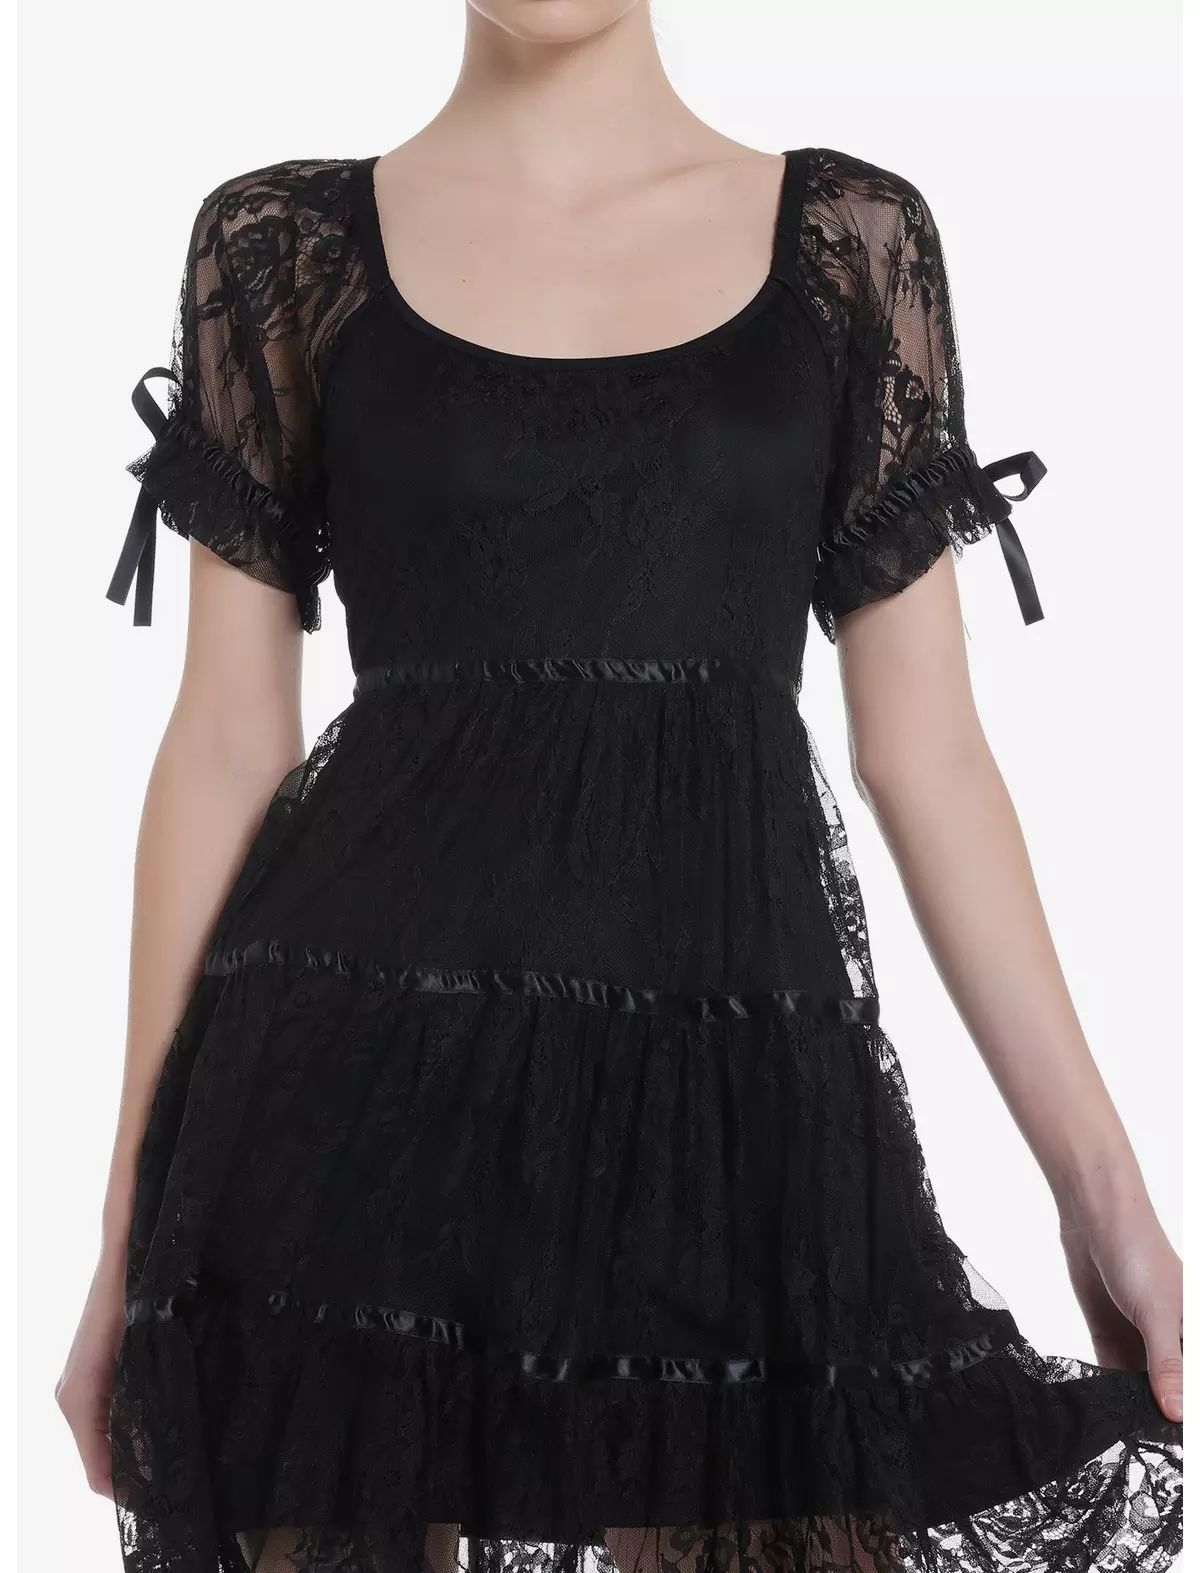 Cosmic Aura Black Lace Babydoll Tiered Dress | Hot Topic | Hot Topic